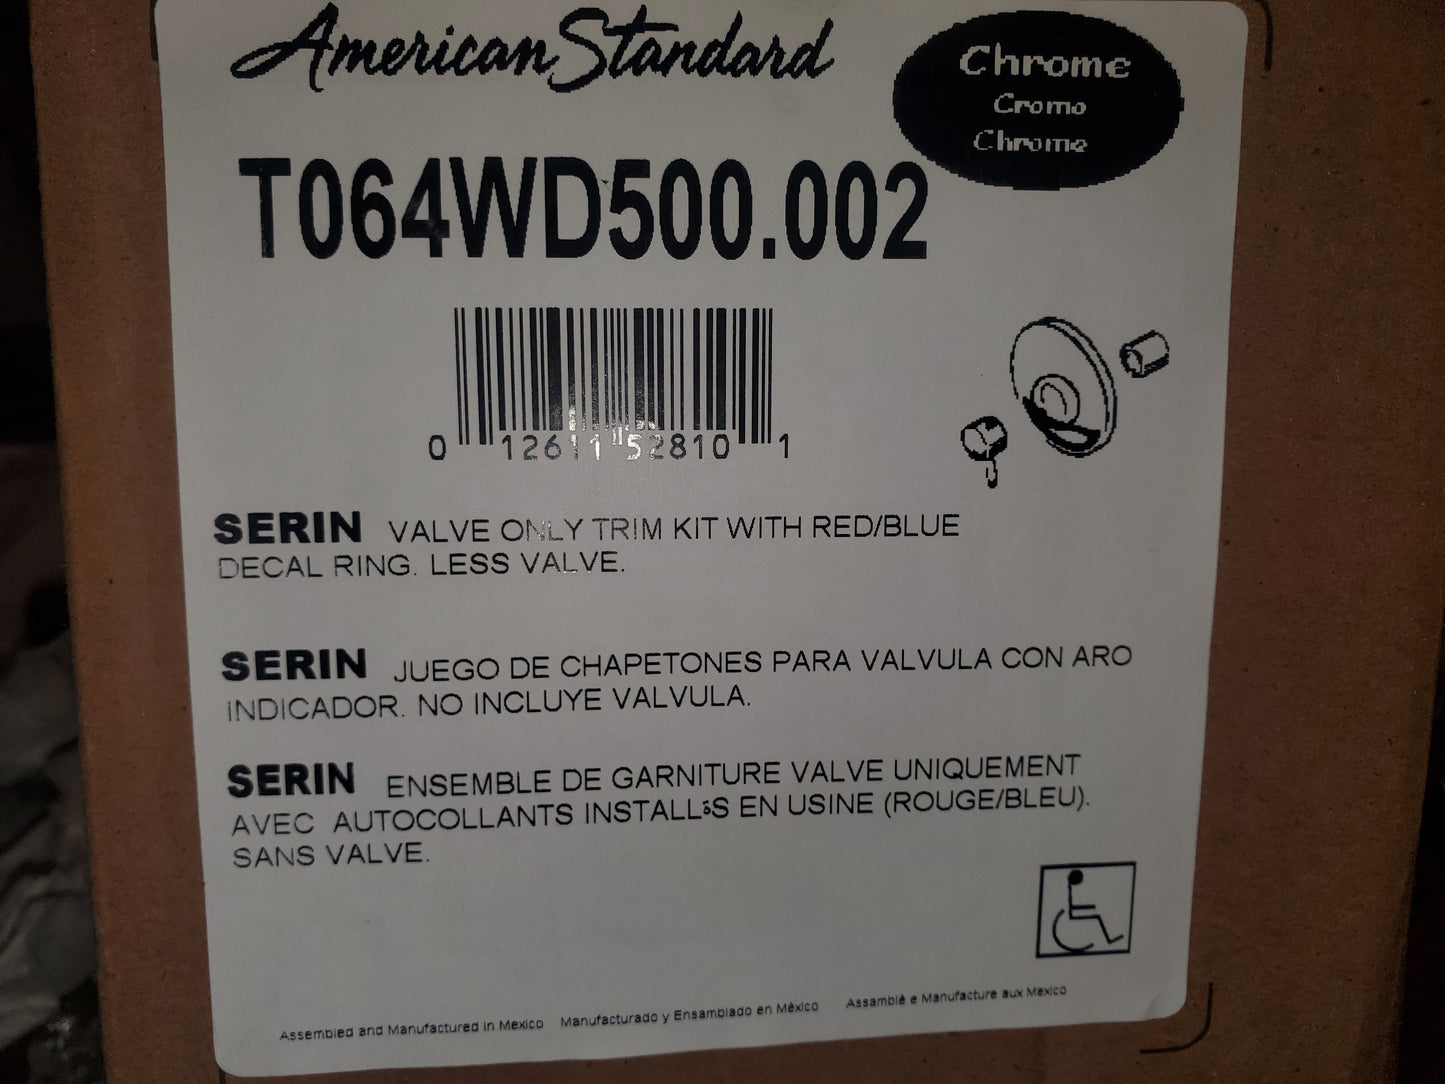 SERIN CHROME SHOWER VALVE ONLY TRIM KIT WITH RED/BLUE DECAL RING, LESS VALVE BODY